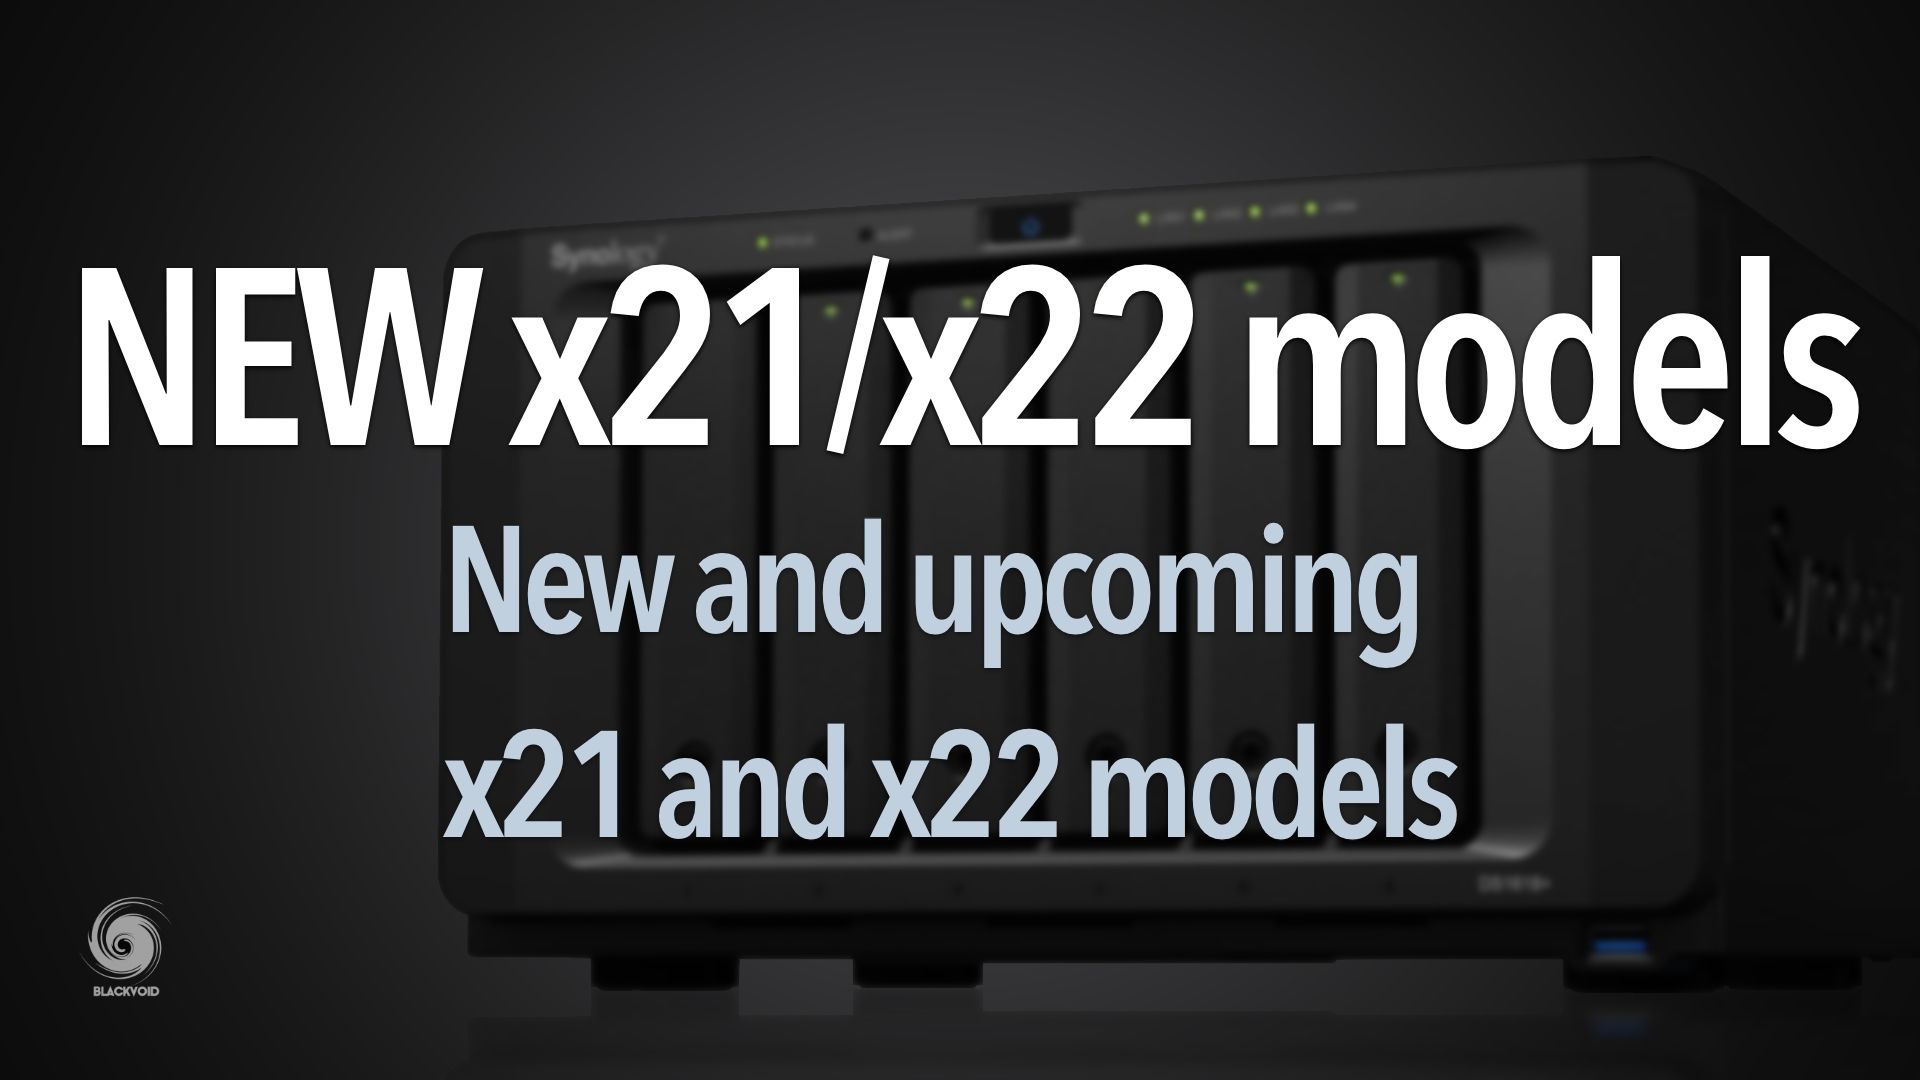 All of NEW and upcoming x21/x22 NAS models coming in 2020/2021